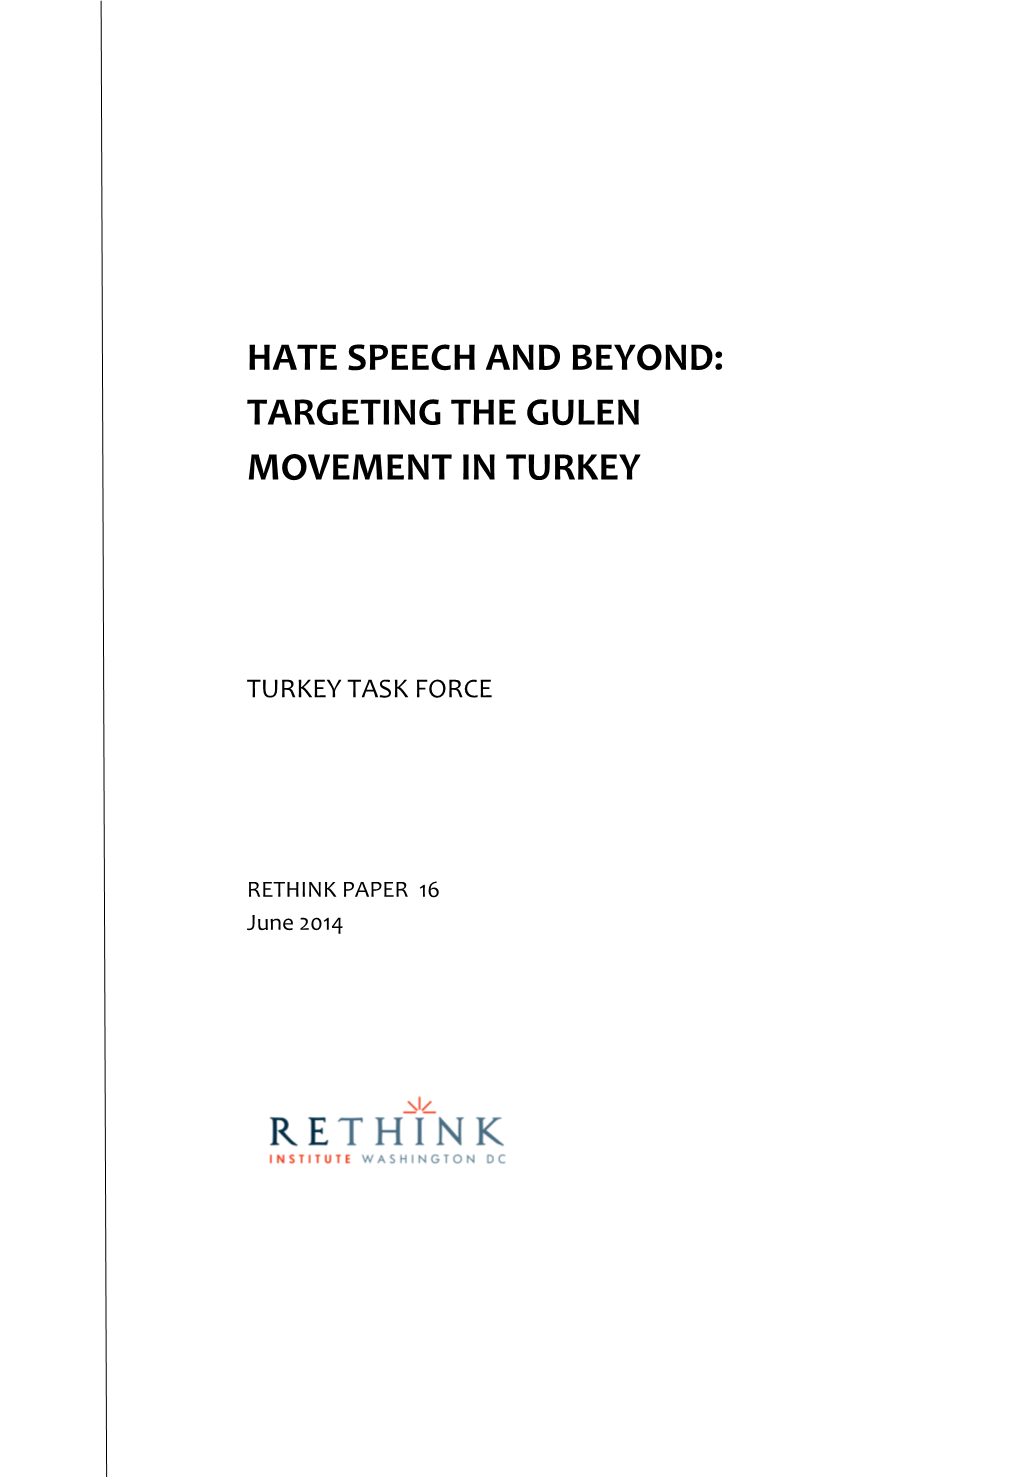 Hate Speech and Beyond: Targeting the Gulen Movement in Turkey